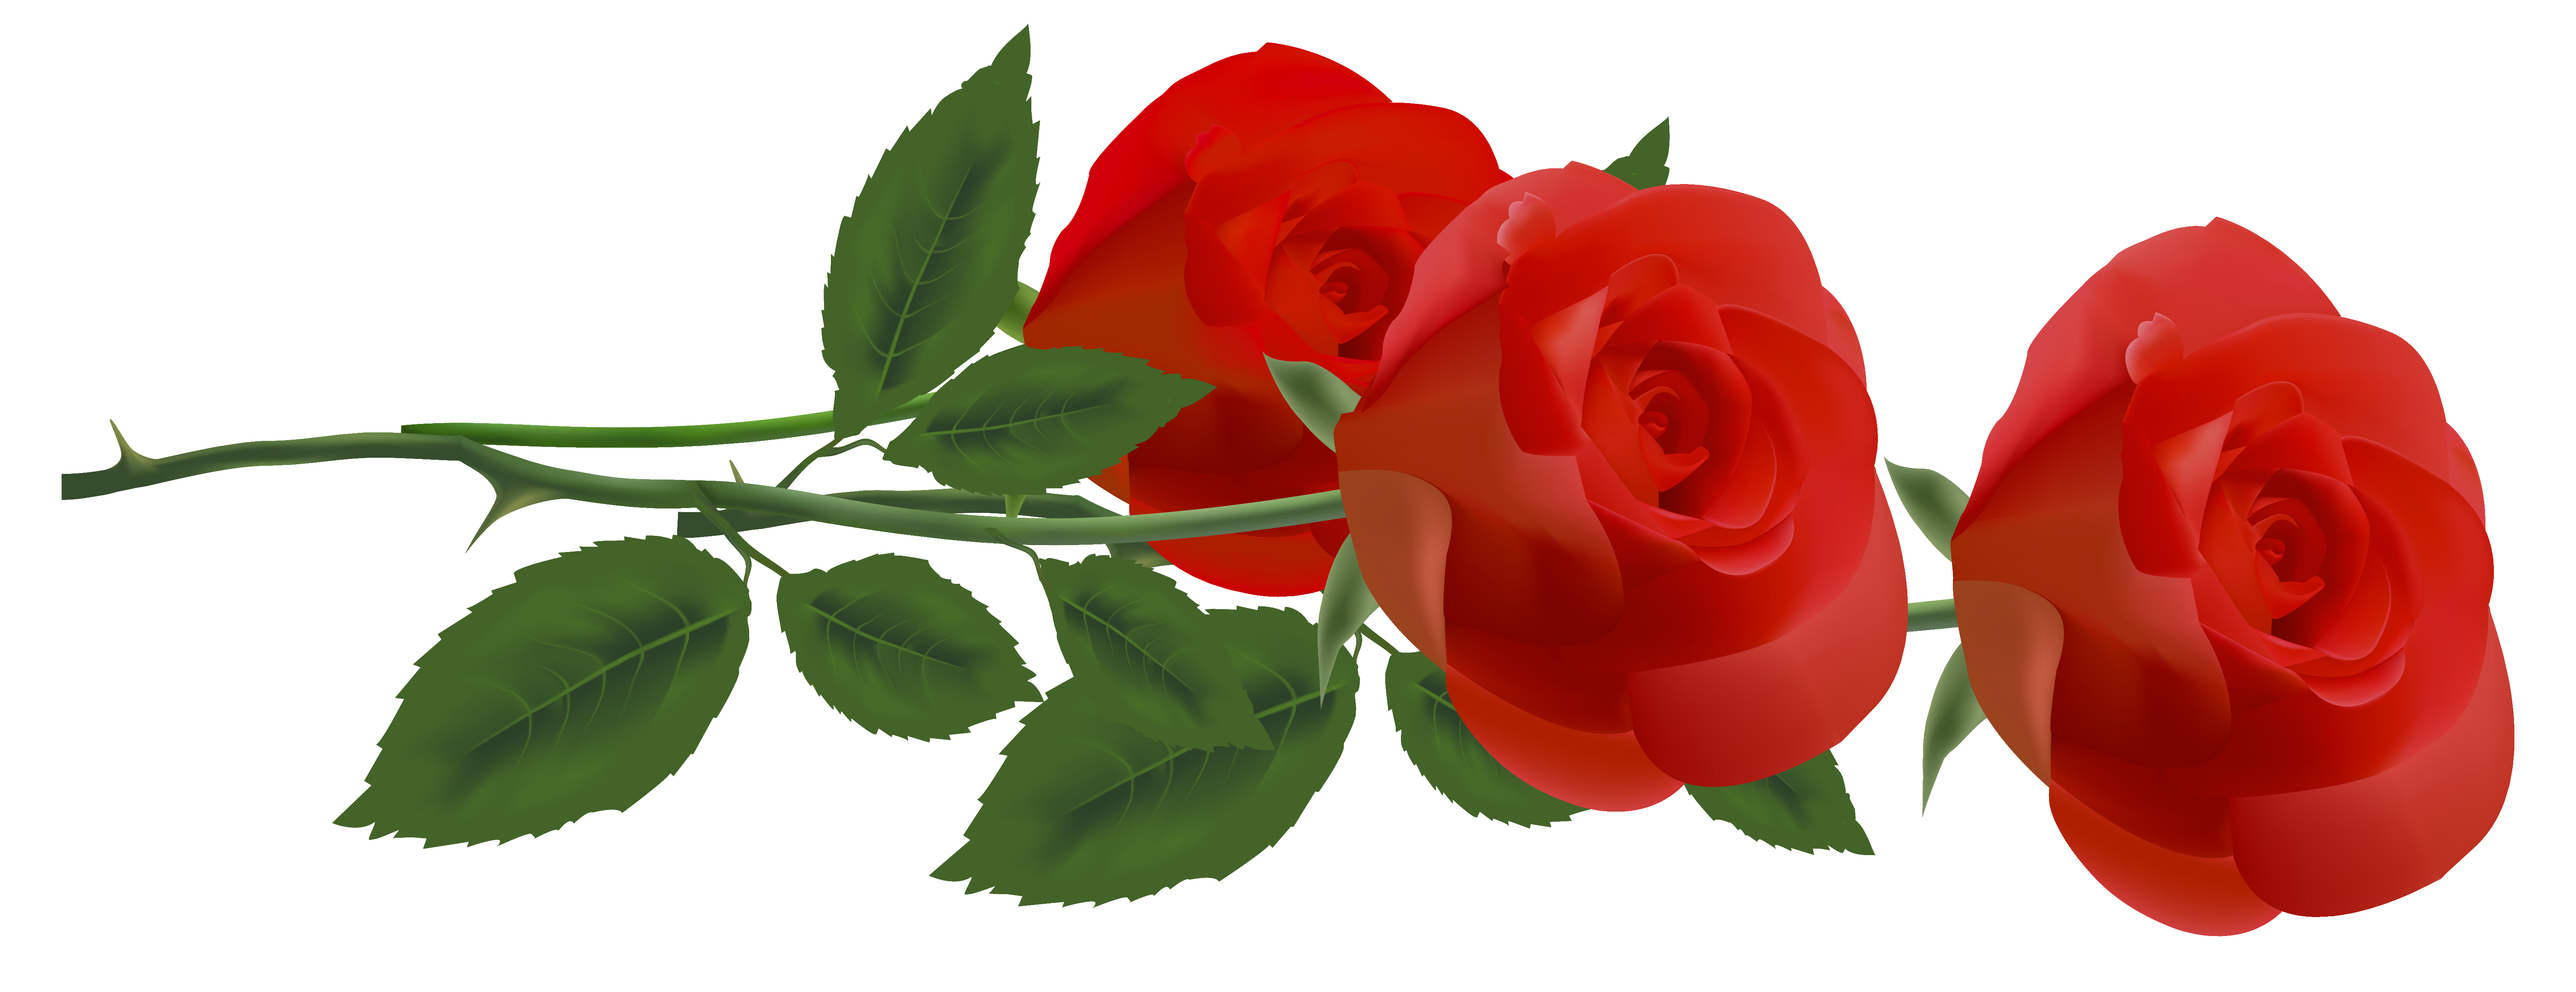 clipart images of red roses - photo #30